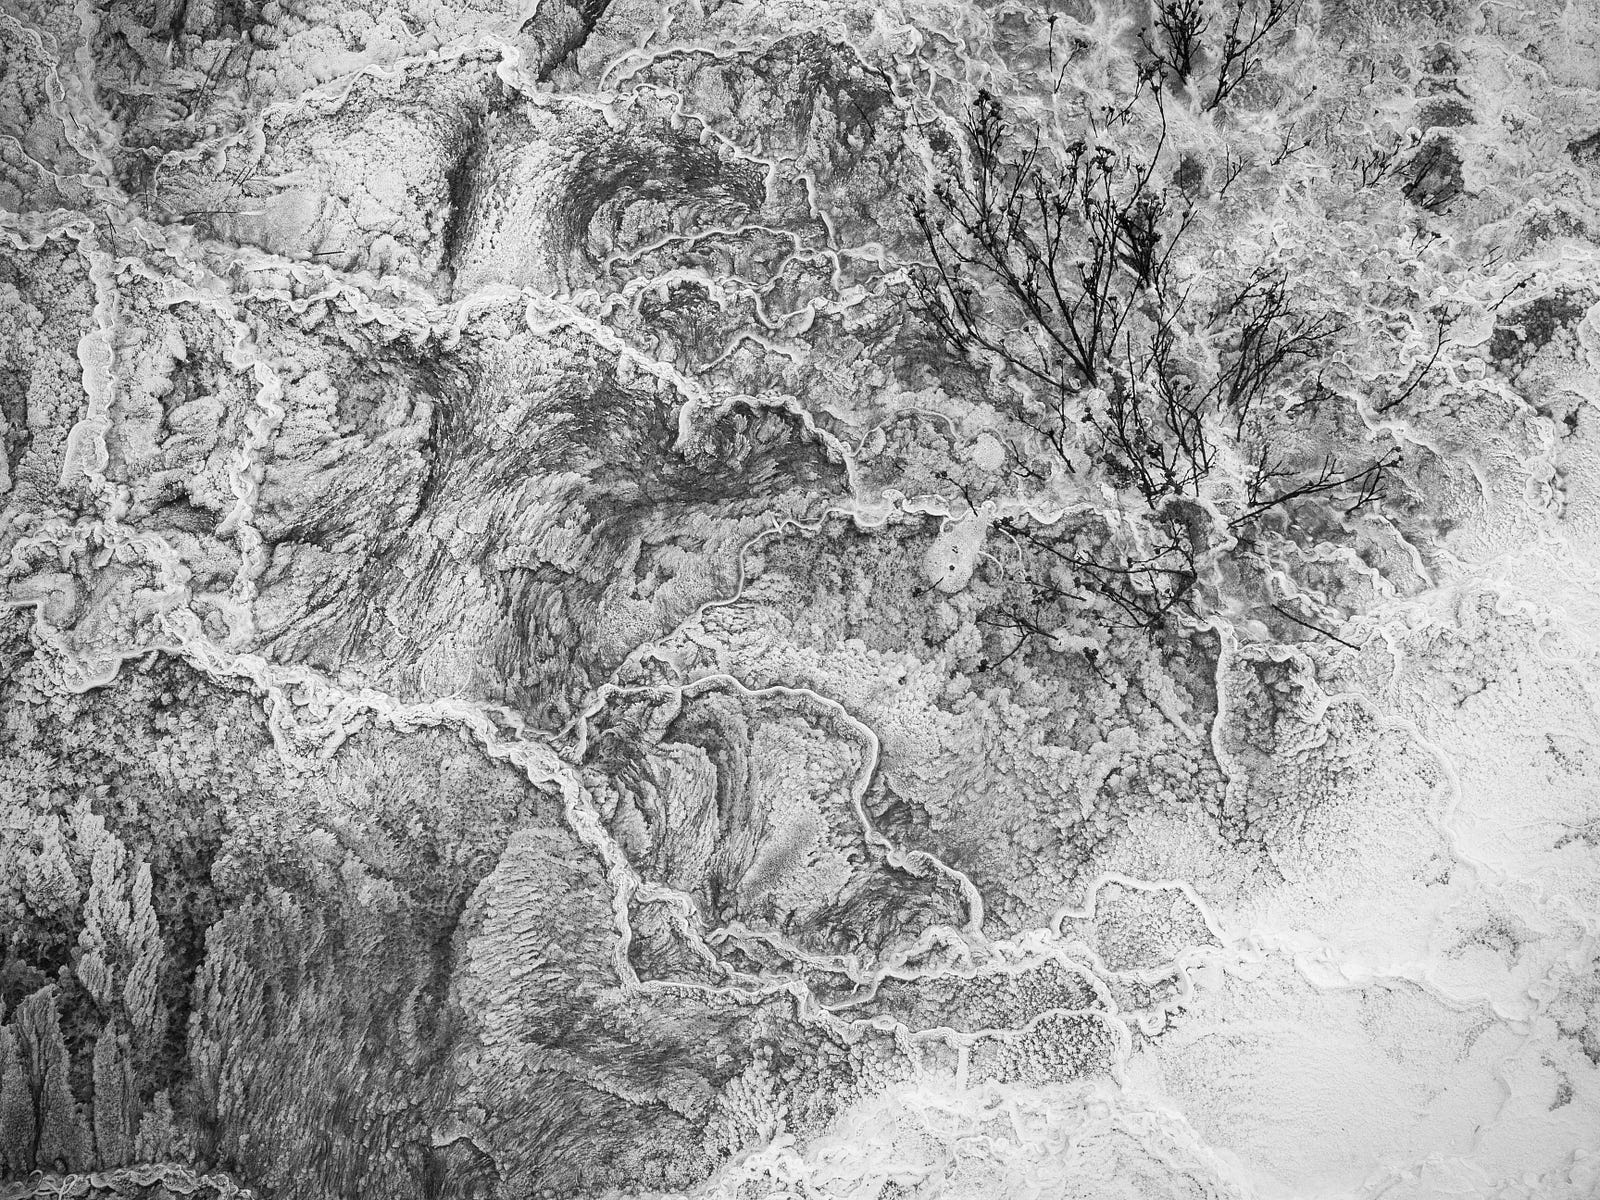 A black and white photo (from above) of trees with calcium deposits covering the ground.